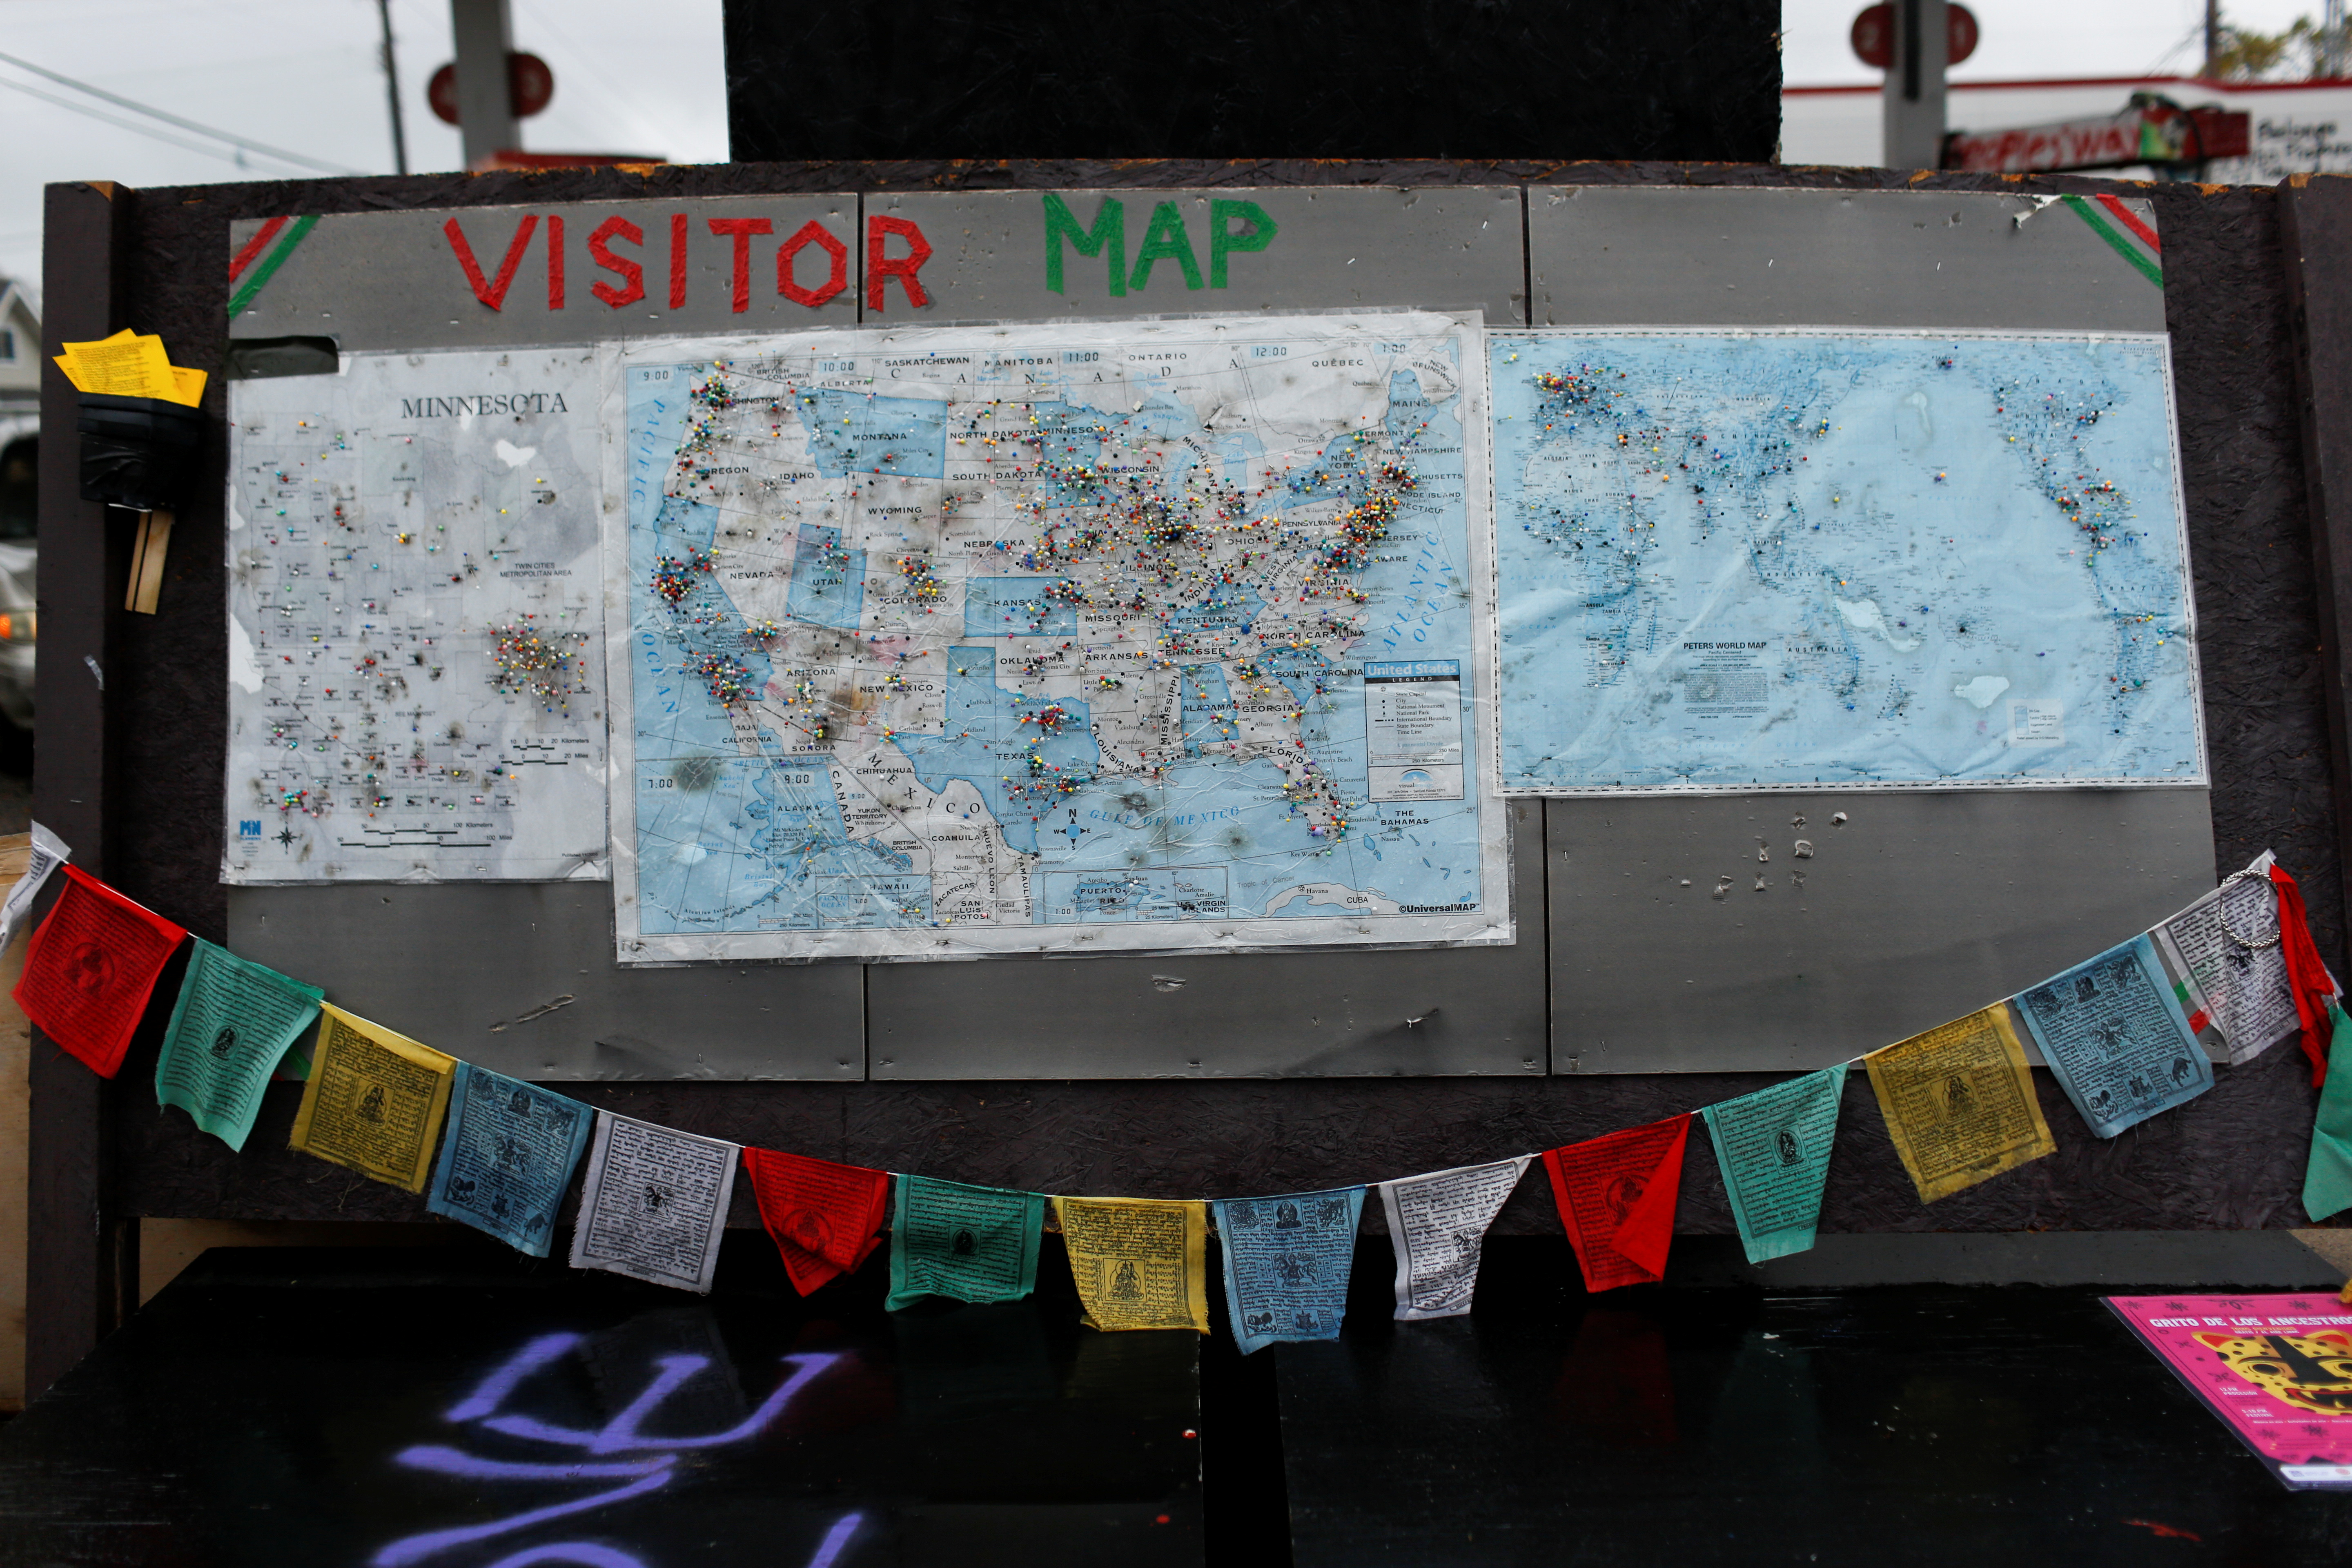 Maps of Minnesota, the country, and the world are filled with pins from visitors at George Floyd Square in Minneapolis, Minnesota, U.S., October 28, 2021. Picture taken October 28, 2021.  REUTERS/Nicole Neri